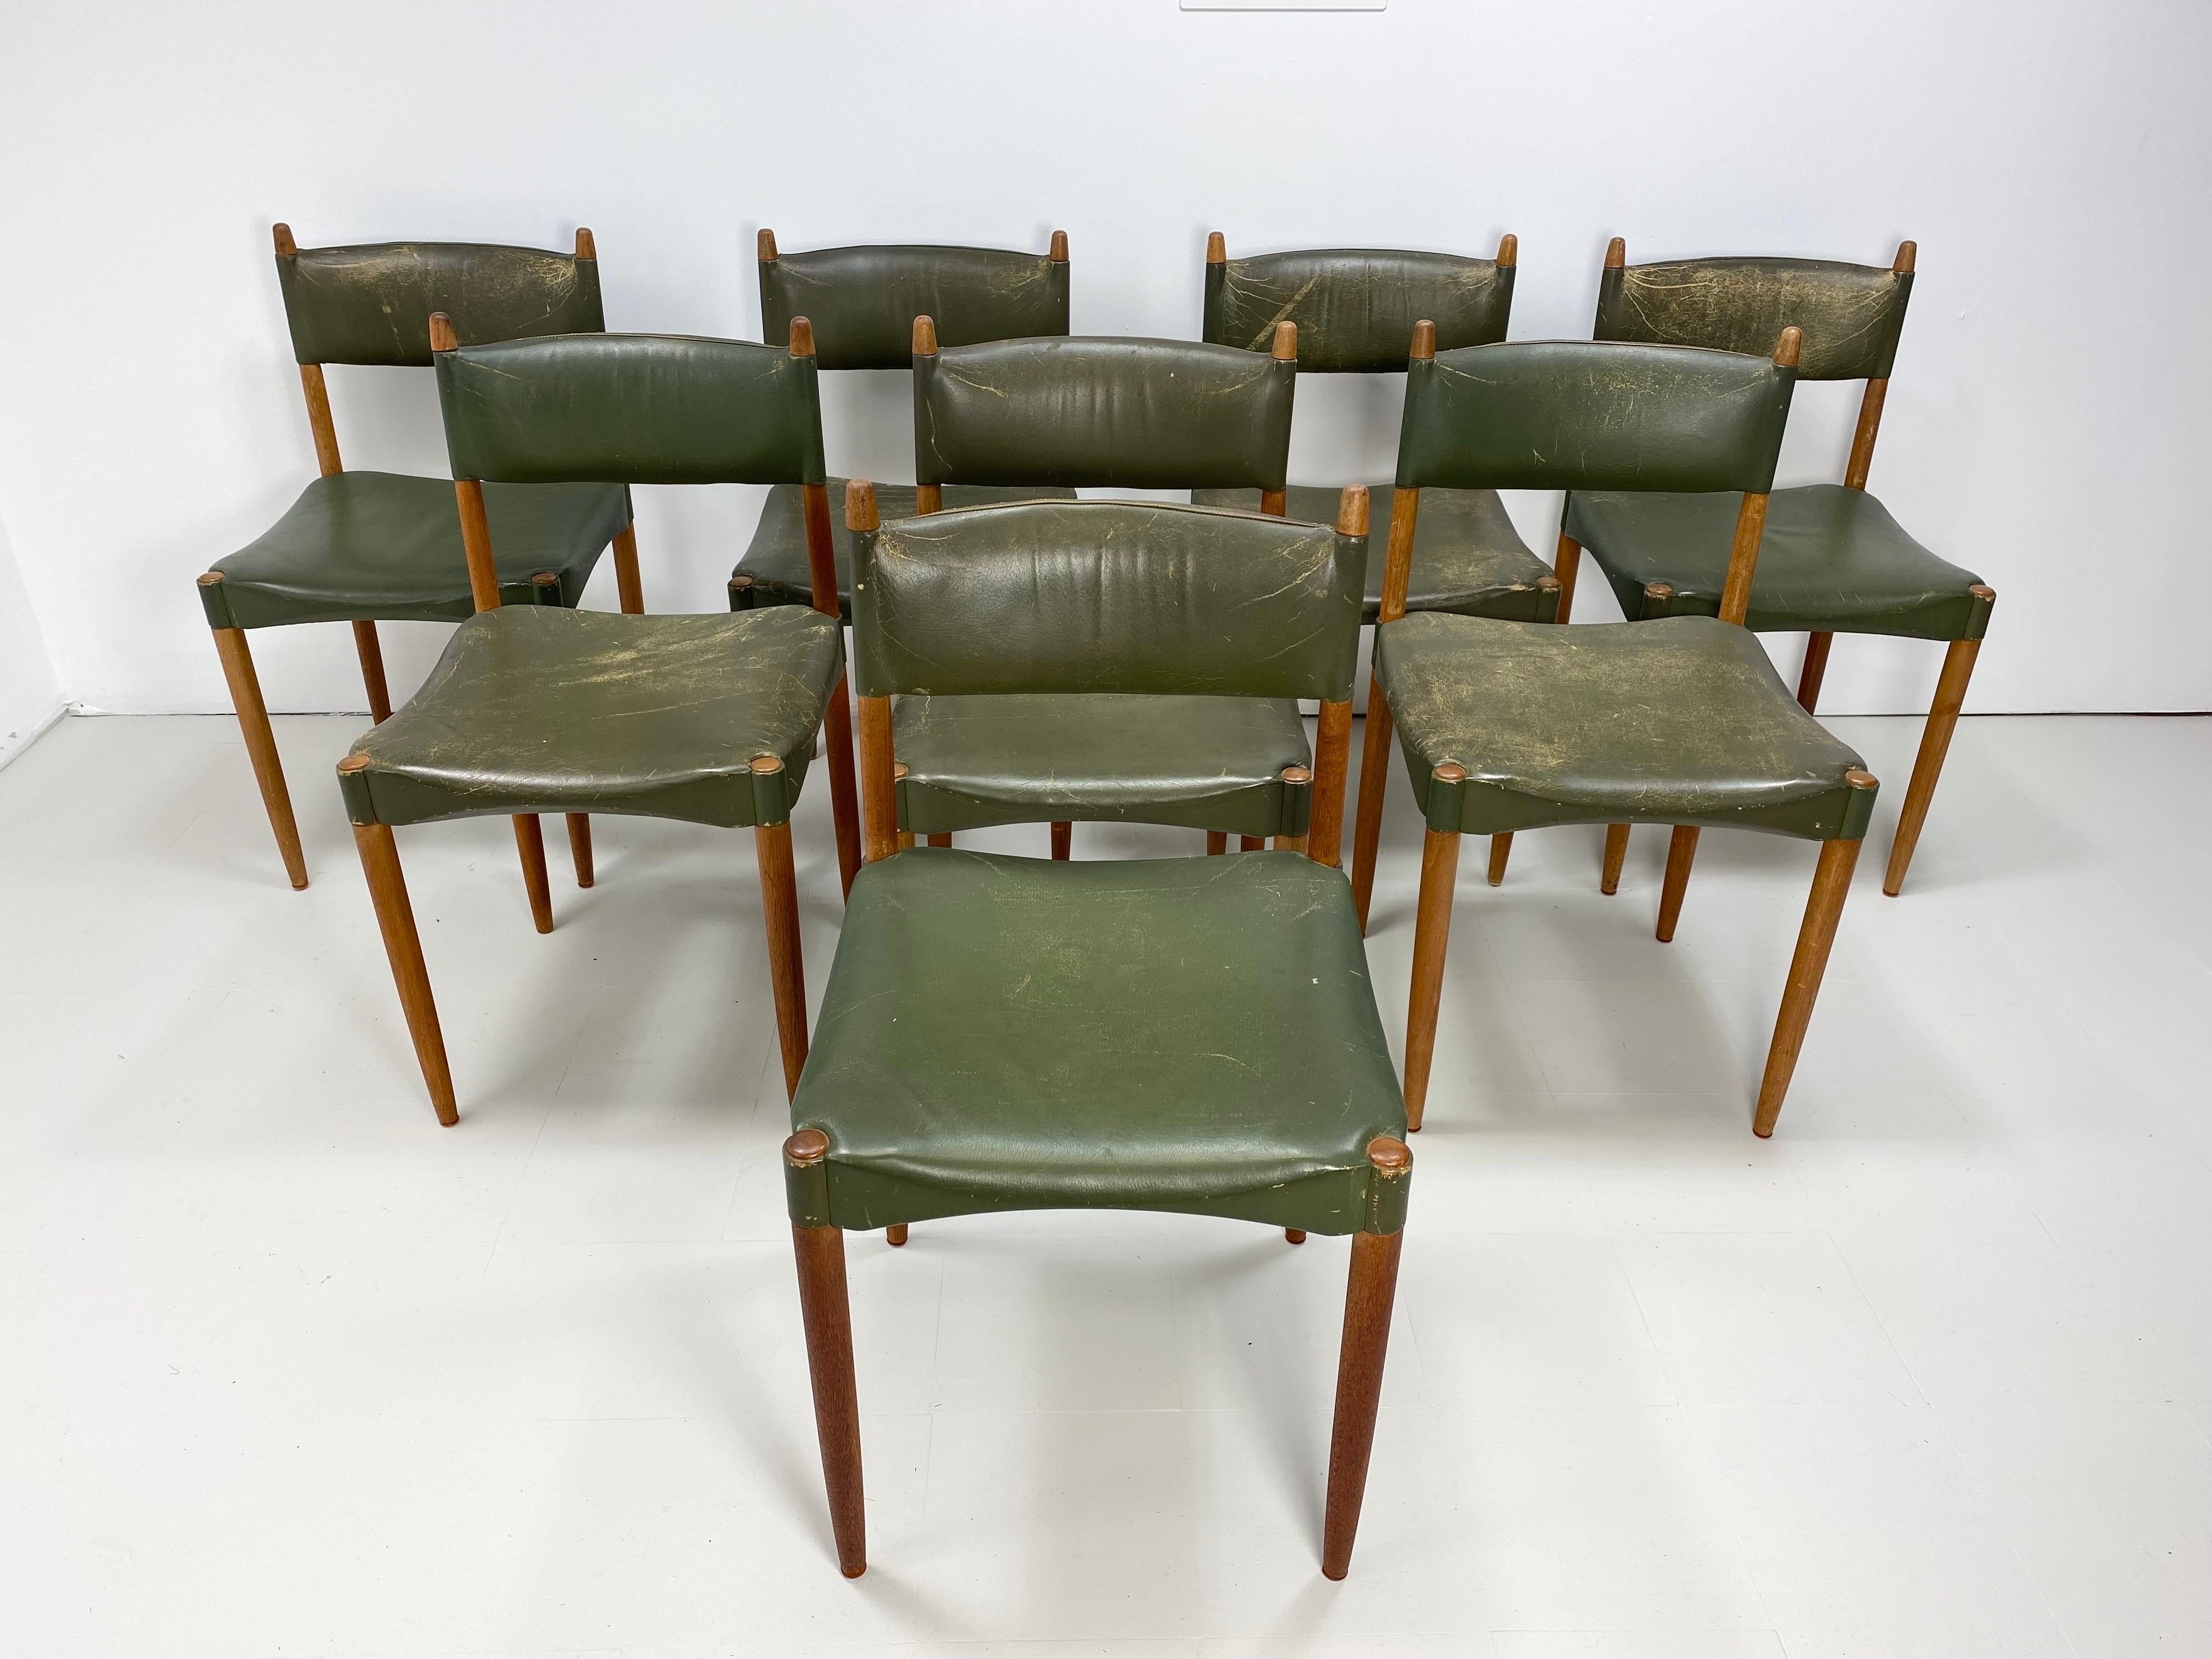 1950s dining chairs